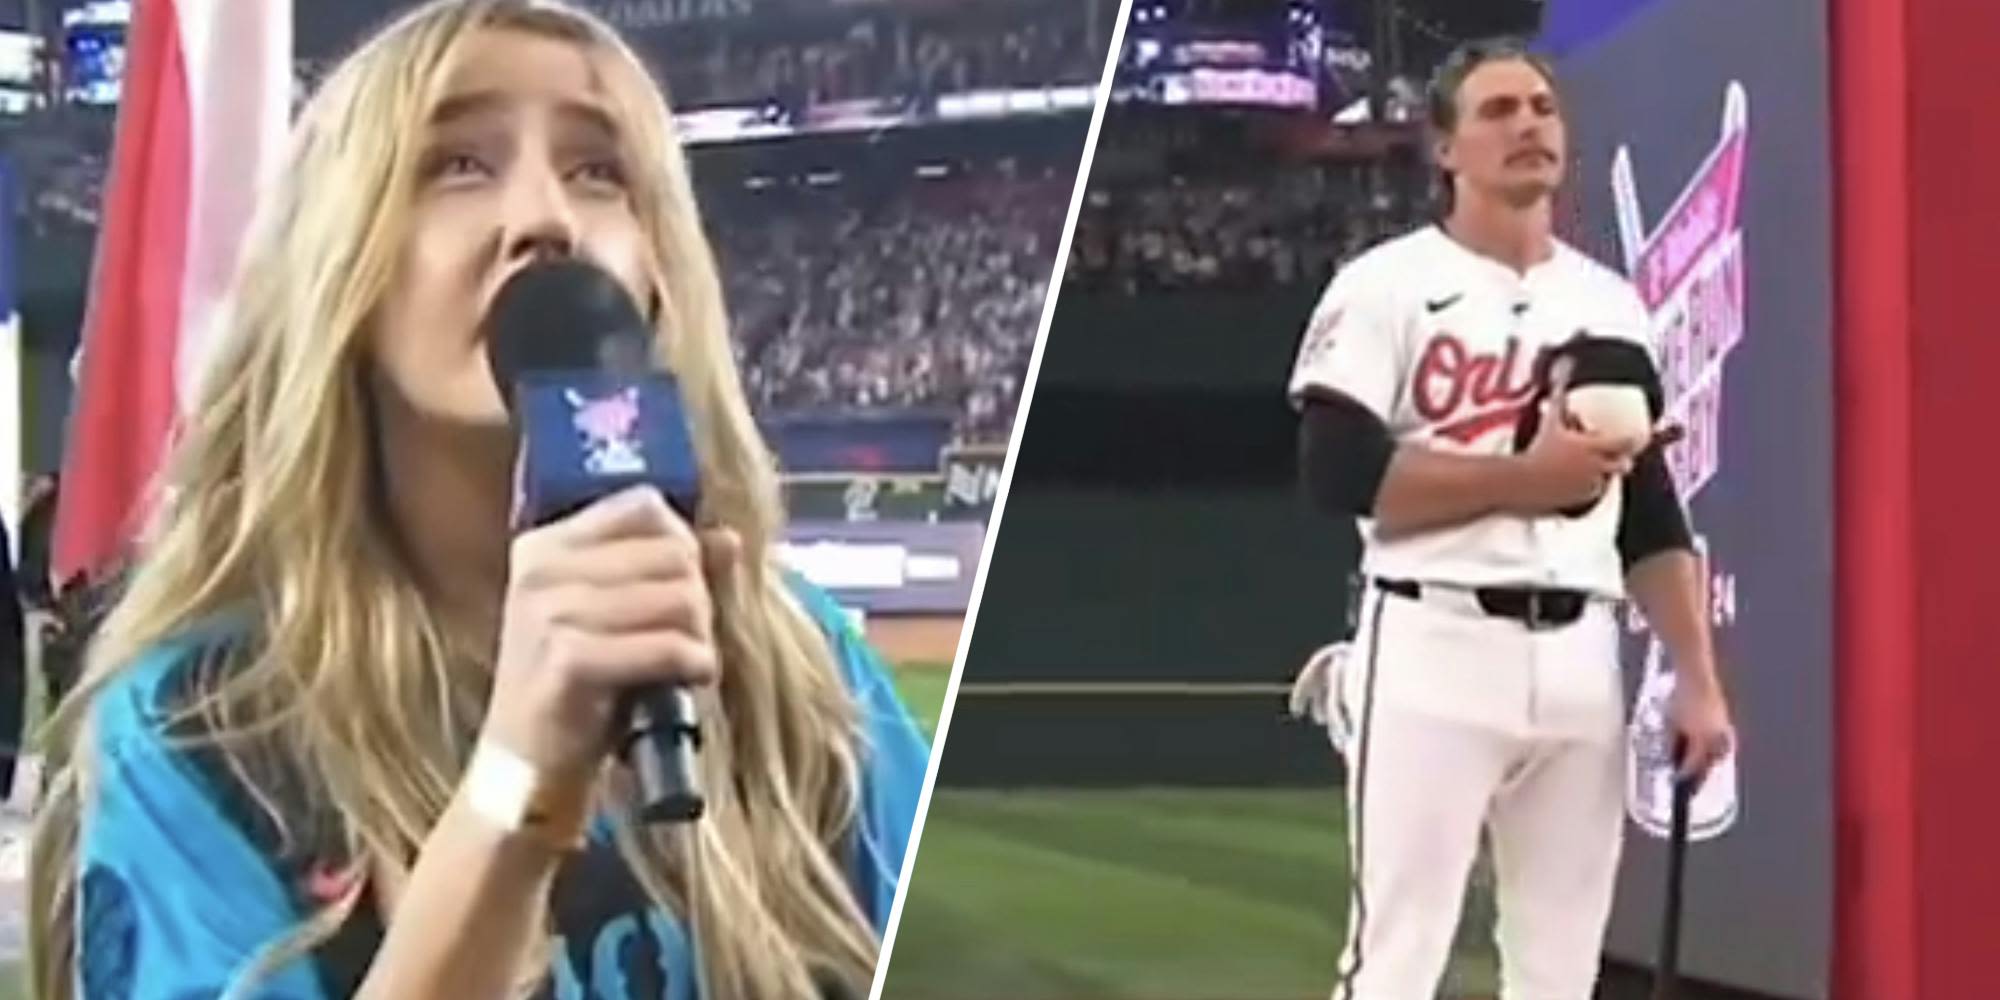 Country star Ingrid Andress performs a national anthem so cringeworthy even the players couldn't keep a straight face